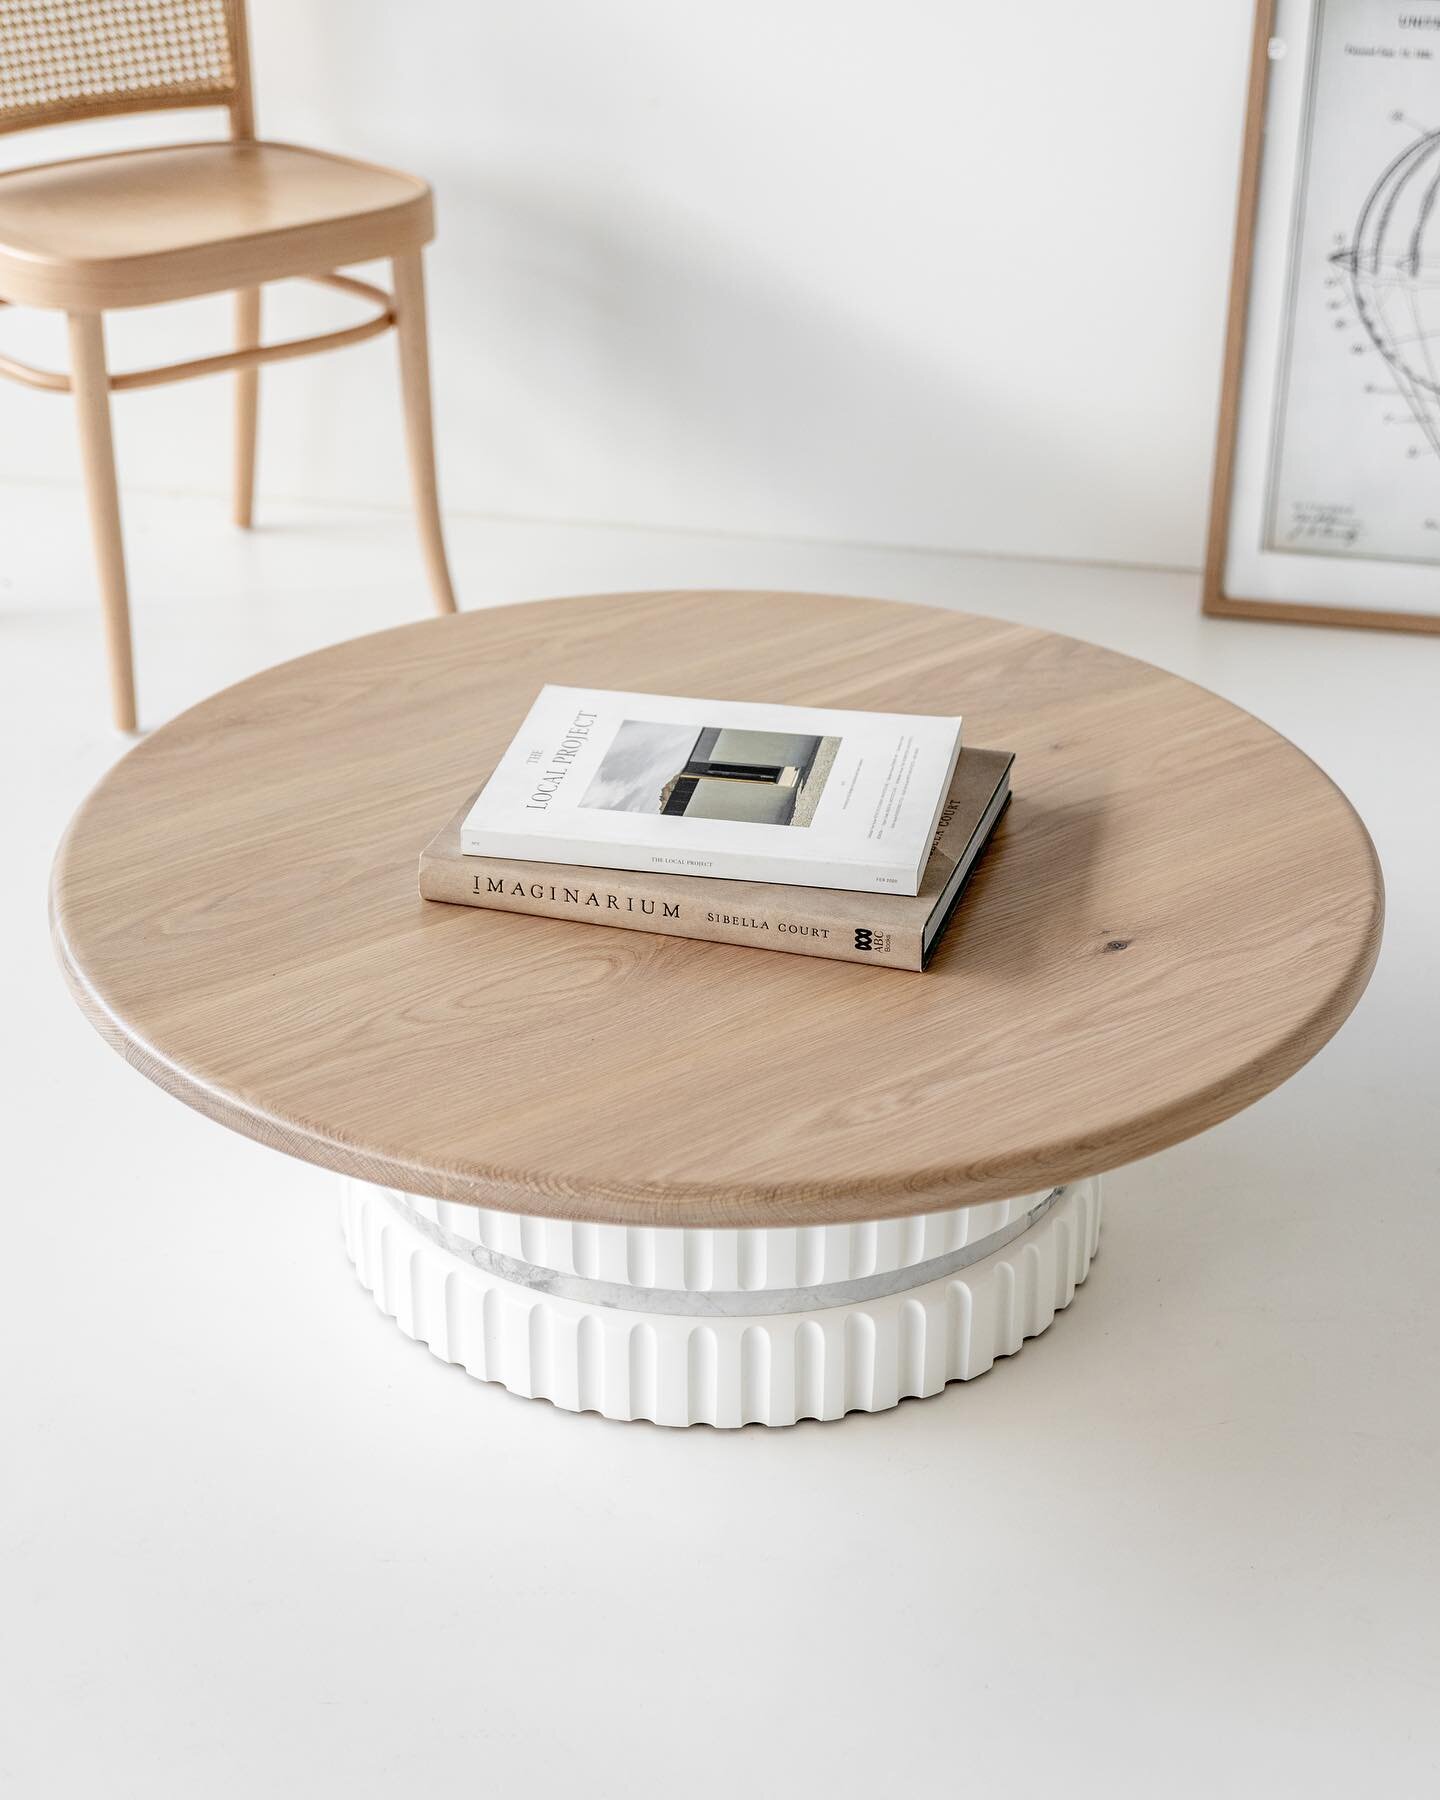 Esto Coffee Table to match, or have this little biscuit all on it&rsquo;s own 🍪

This one in American / White Base / Stone Disc
900mmW x 300mmH
&bull;
&bull;
&bull;
&bull;
&bull;
&bull;
&bull;
&bull;
&bull;
&bull;
&bull;
&bull;
&bull;
&bull;
&bull;
